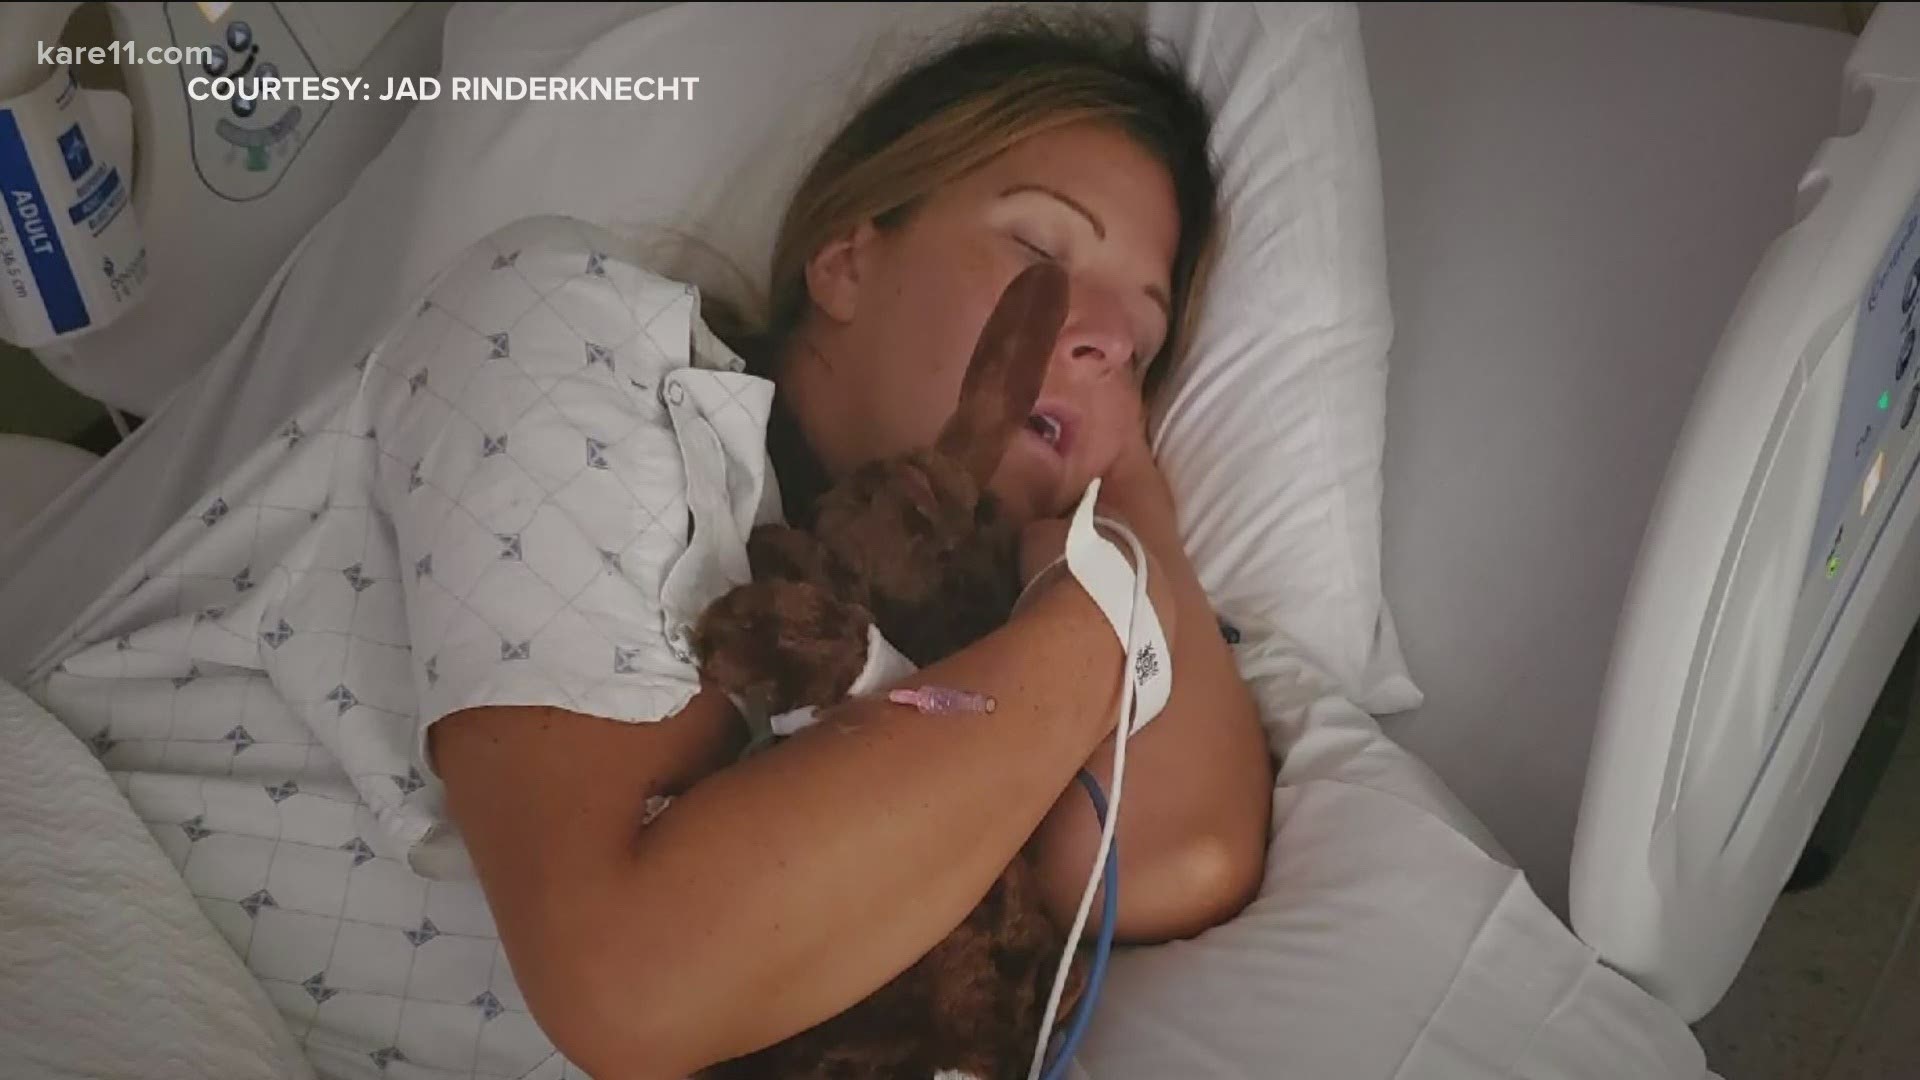 Nicol Rinderknecht was out with coworkers when she started to feel dizzy. Luckily they rushed her to the hospital, and they may have saved her life.